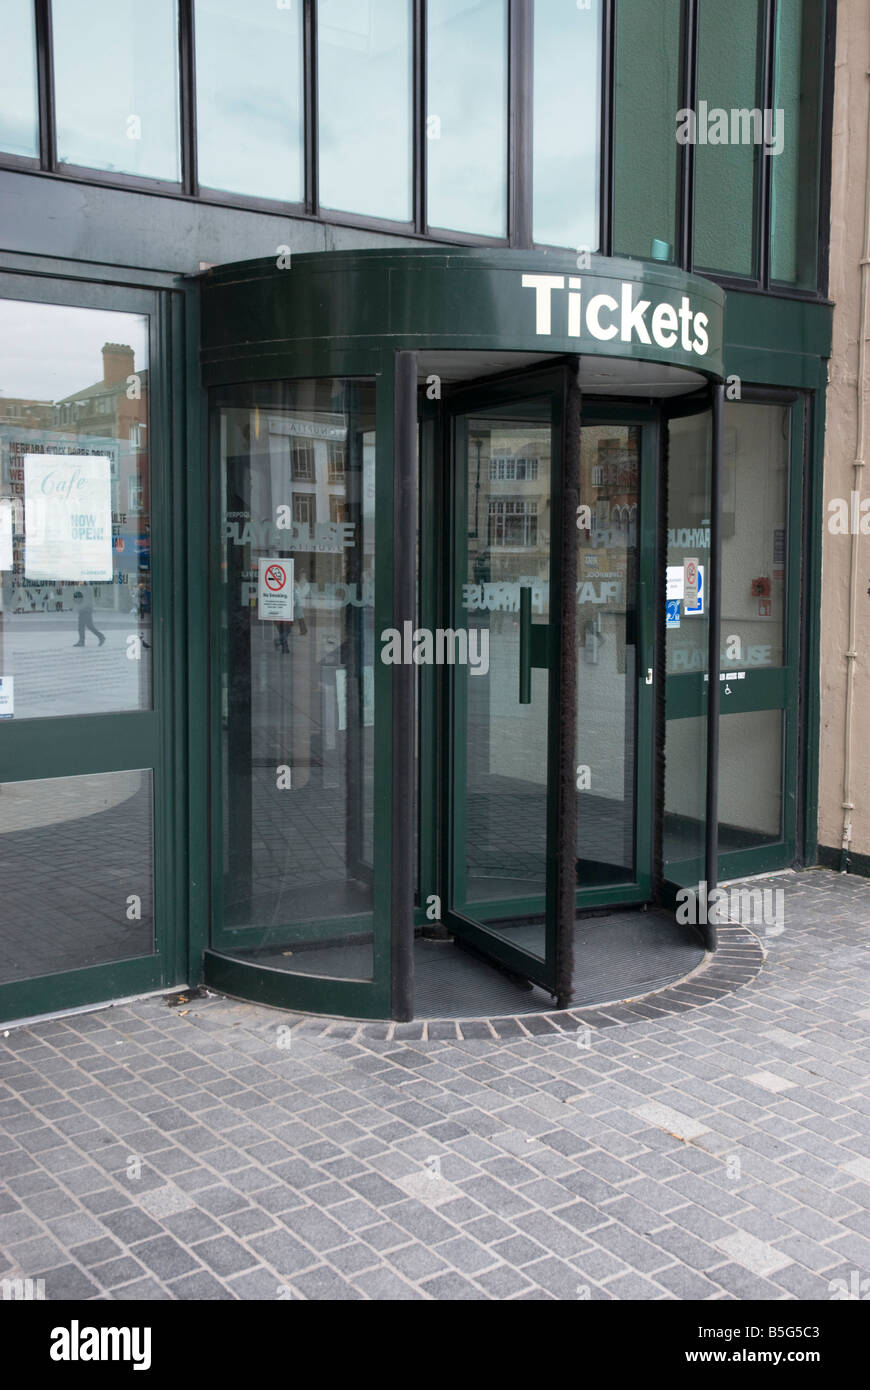 Rotating door at ticket office of Liverpool theatre Stock Photo